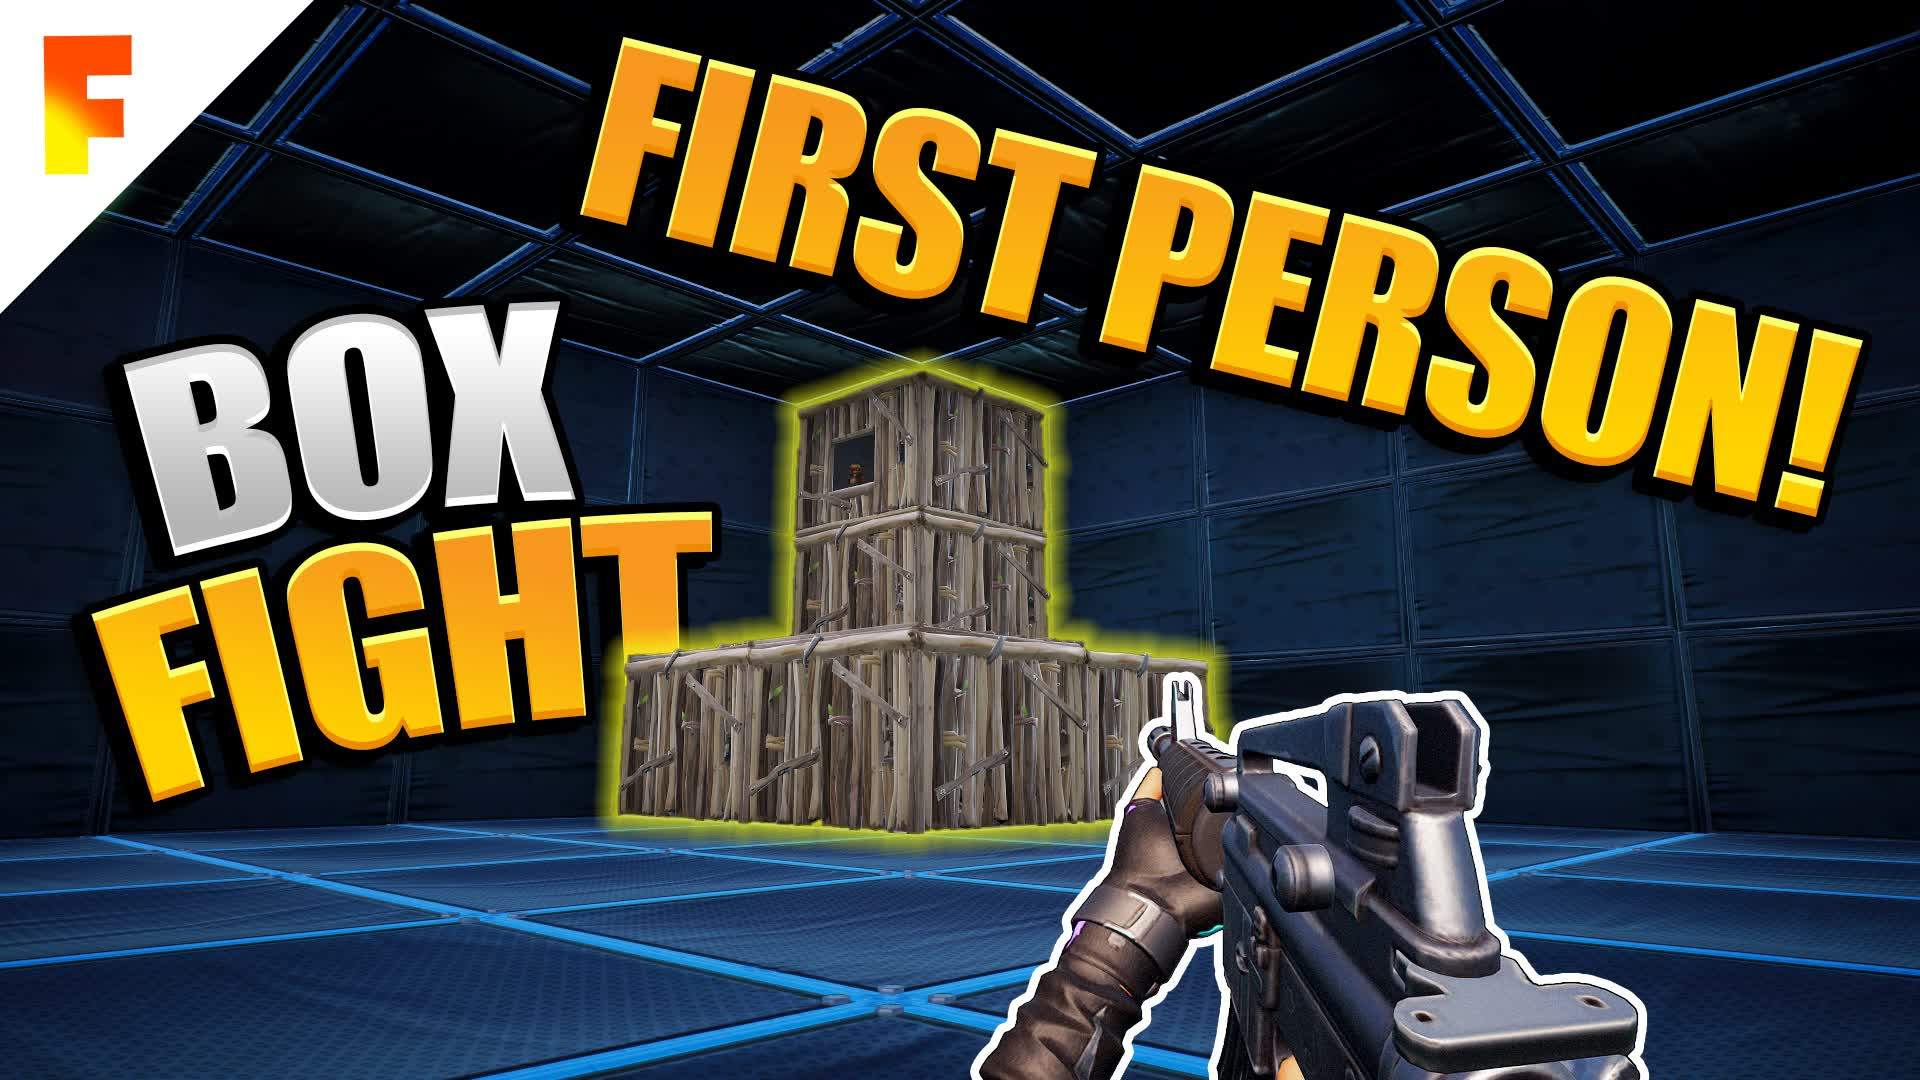 Box Fight First person (FPS)